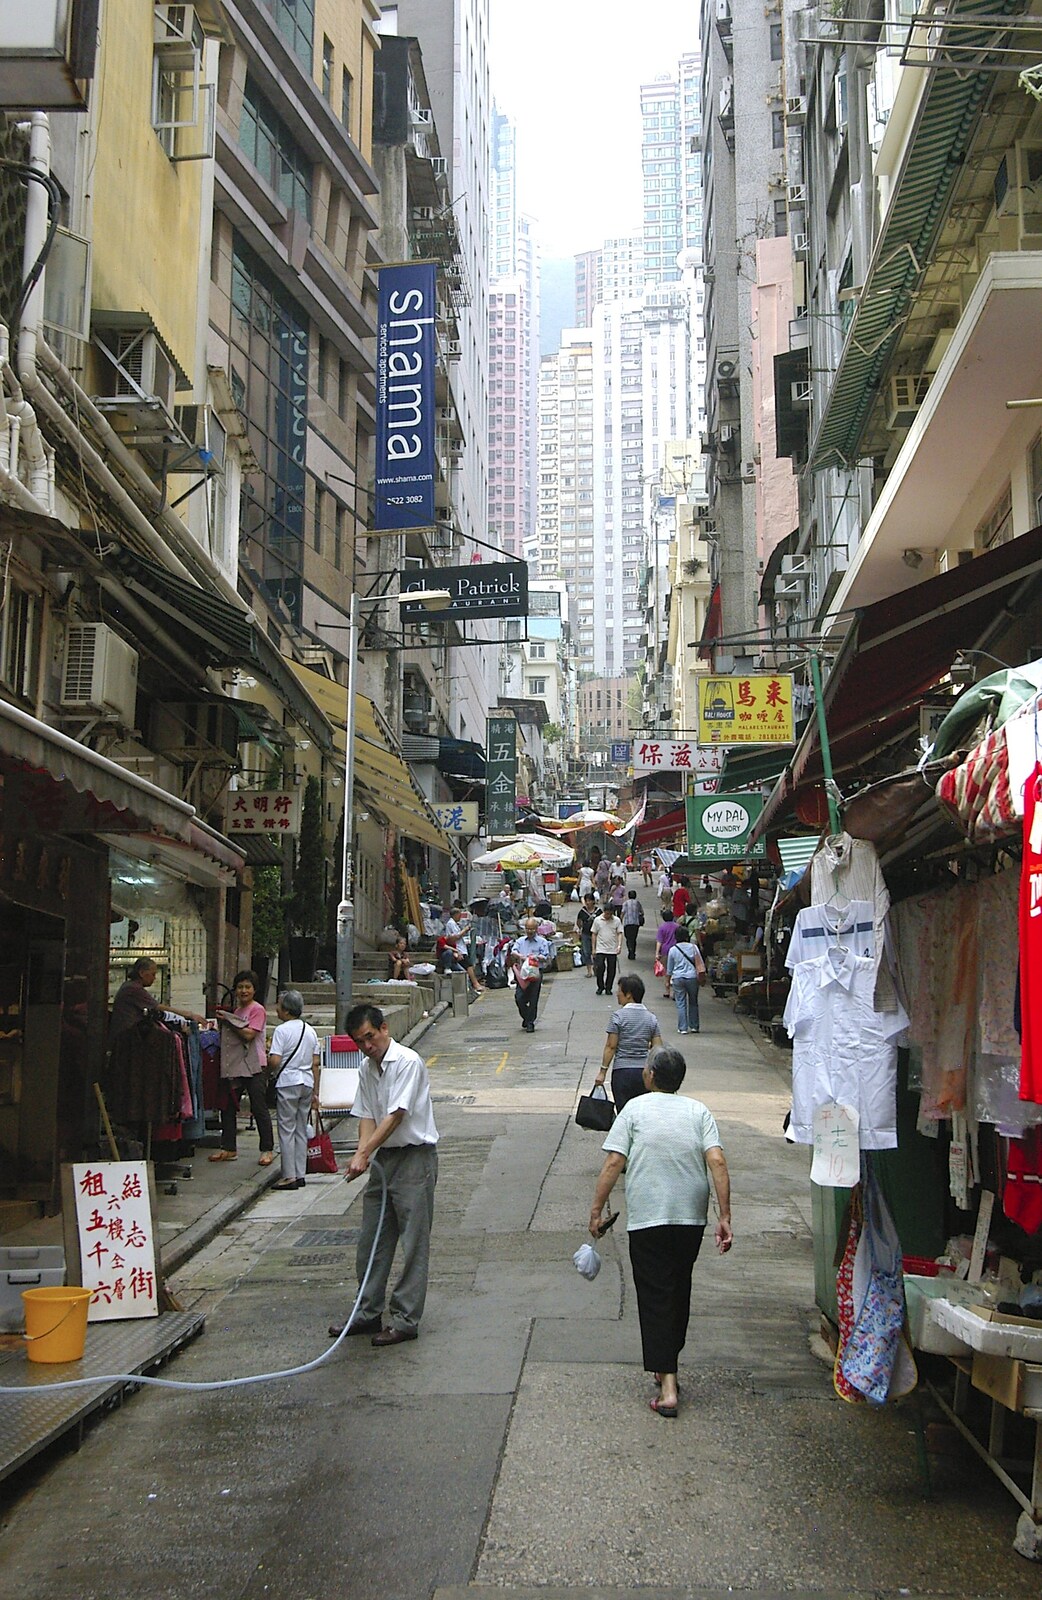 A street hemmed in by densely-packed tower blocks from Lan Kwai Fong Market, Hong Kong, China - 4th October 2006